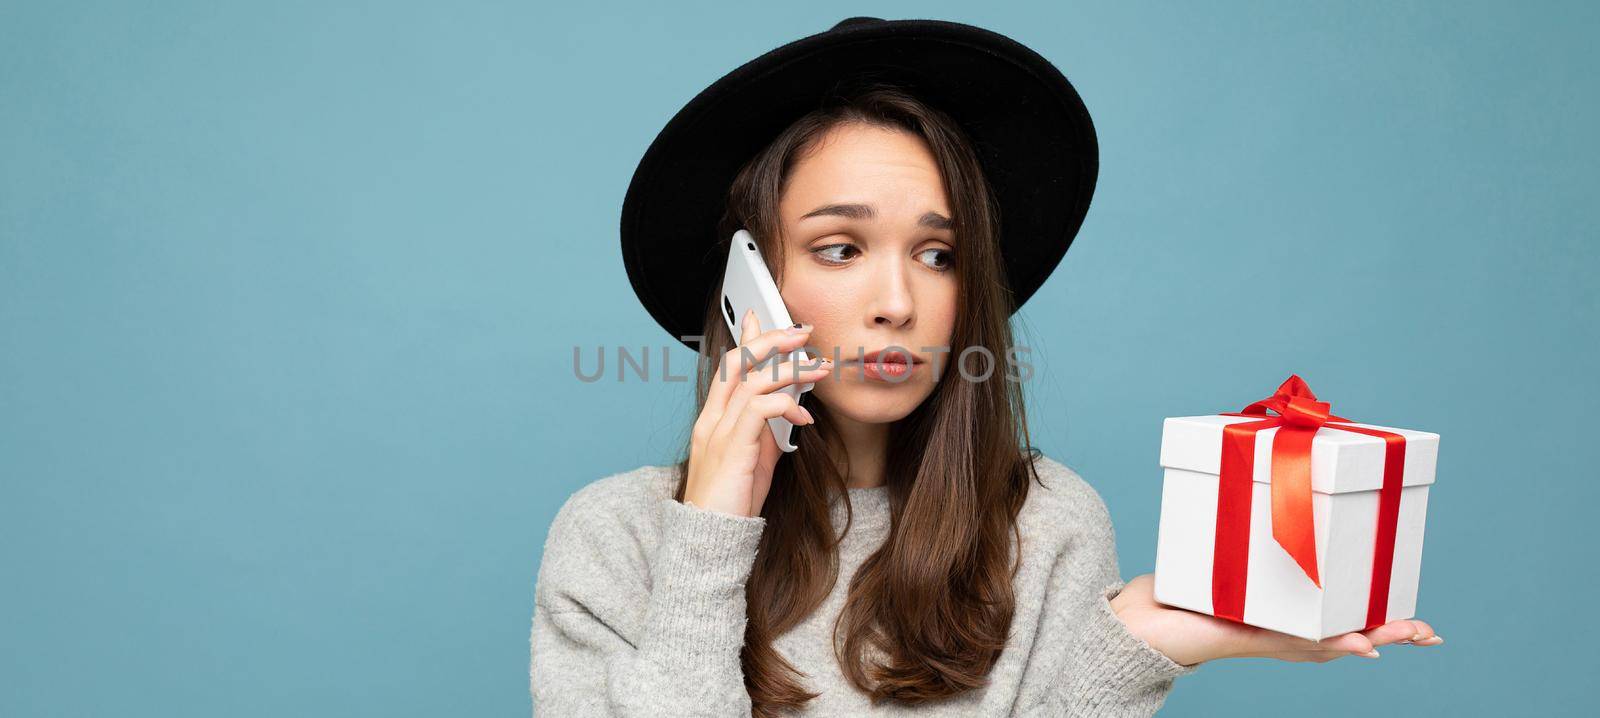 Photo of beautiful upset young brunette woman isolated over blue background wall wearing black hat and grey sweater holding gift box talking on mobile phone and looking to the side.